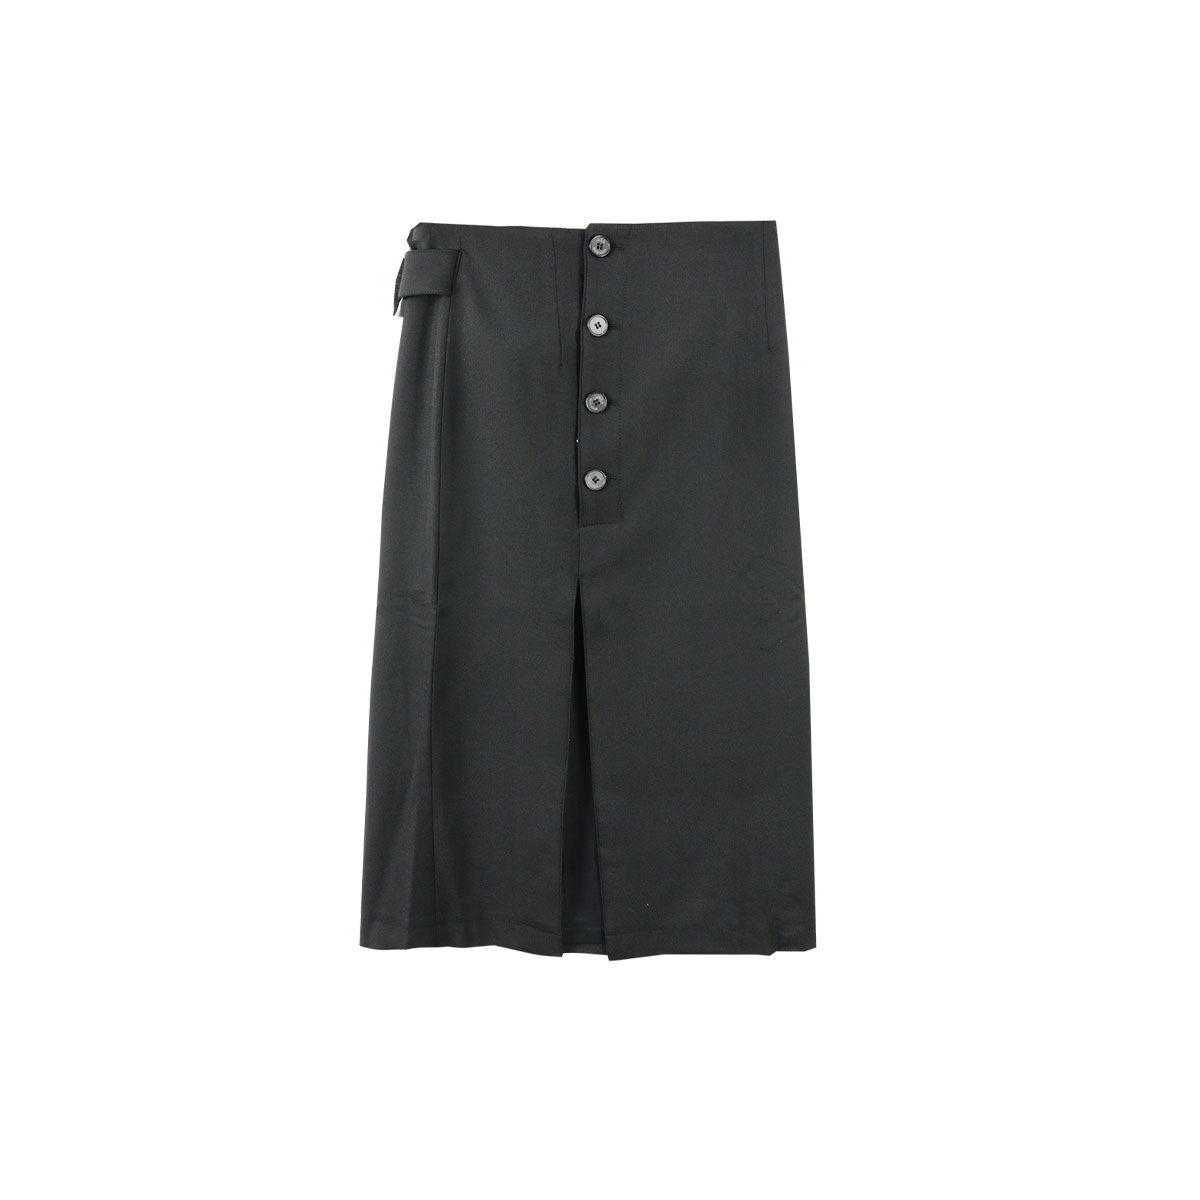 BUTTON DETAILED MIDI SKIRT - Why are you here?